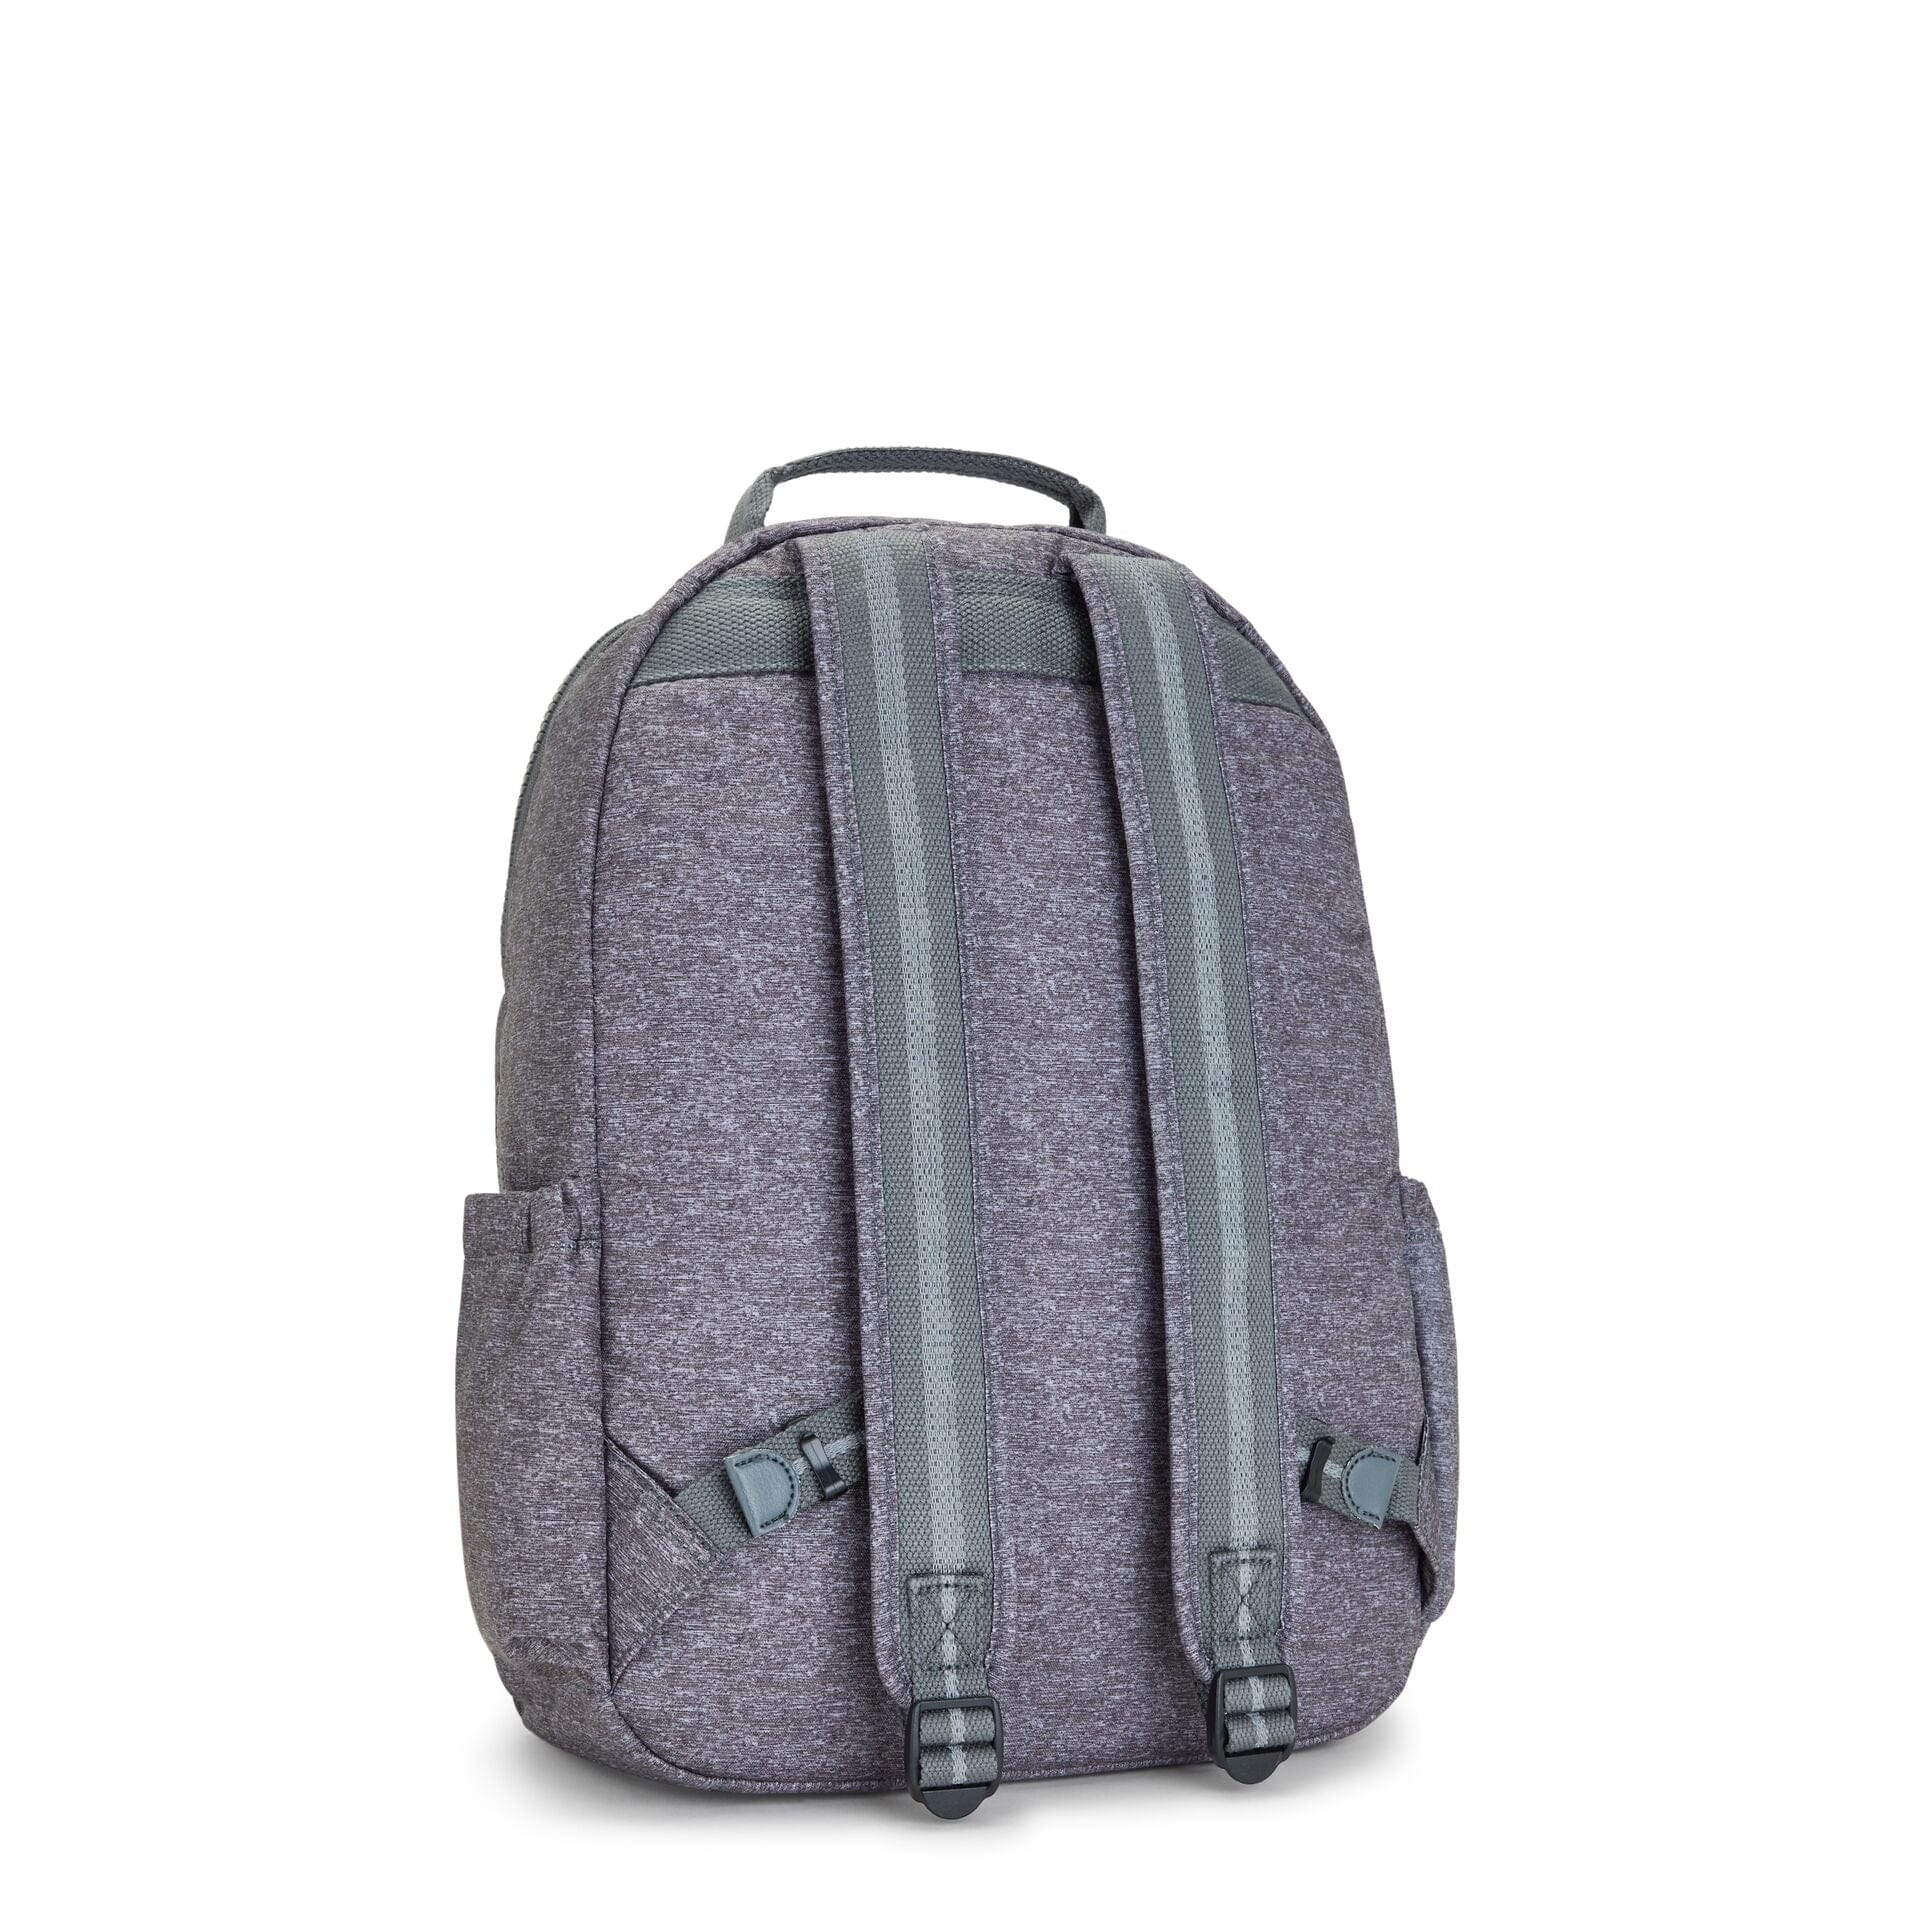 Kipling-Seoul-Large Backpack With Padded Laptop Compartment-Almost Jersey Combo-I5764-1Gb